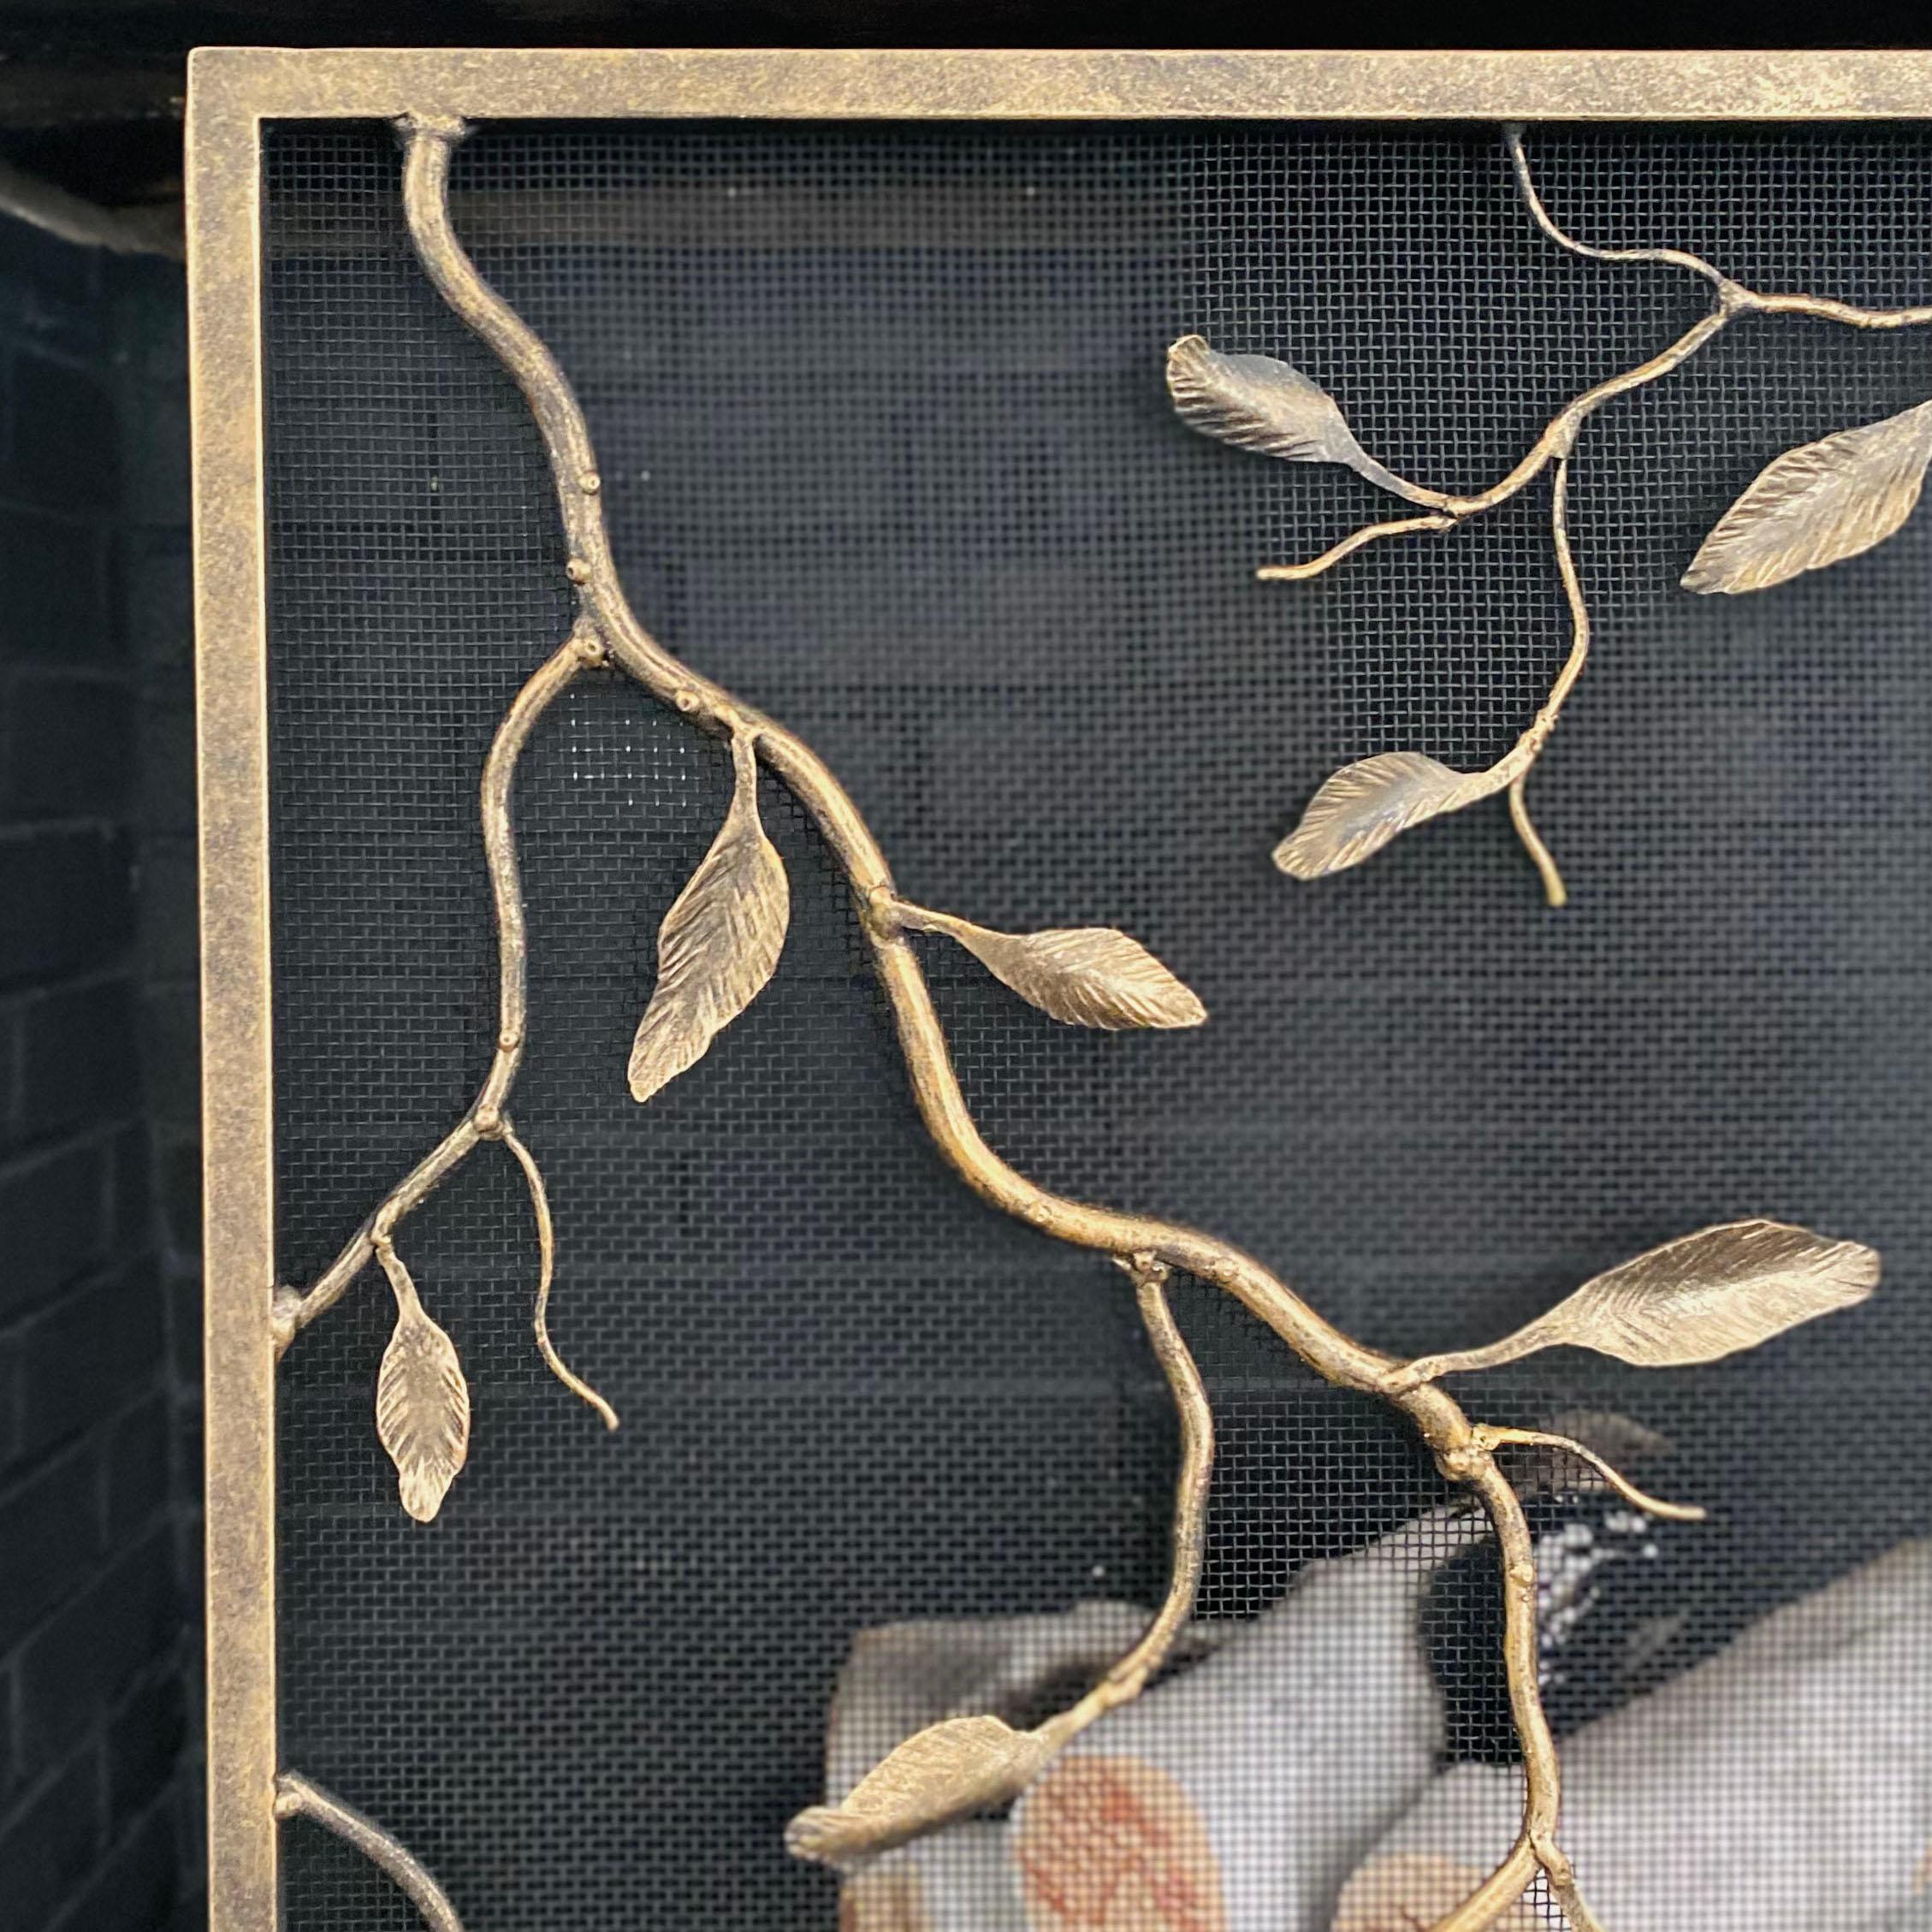 Inspired by the delicate beauty of crinkled autumn leaves, the Lennox fireplace screen adds a seasonally warm character to home's coziest spot: the fireplace. The beauty of texture created by hand comes across in this one of a kind design, with no